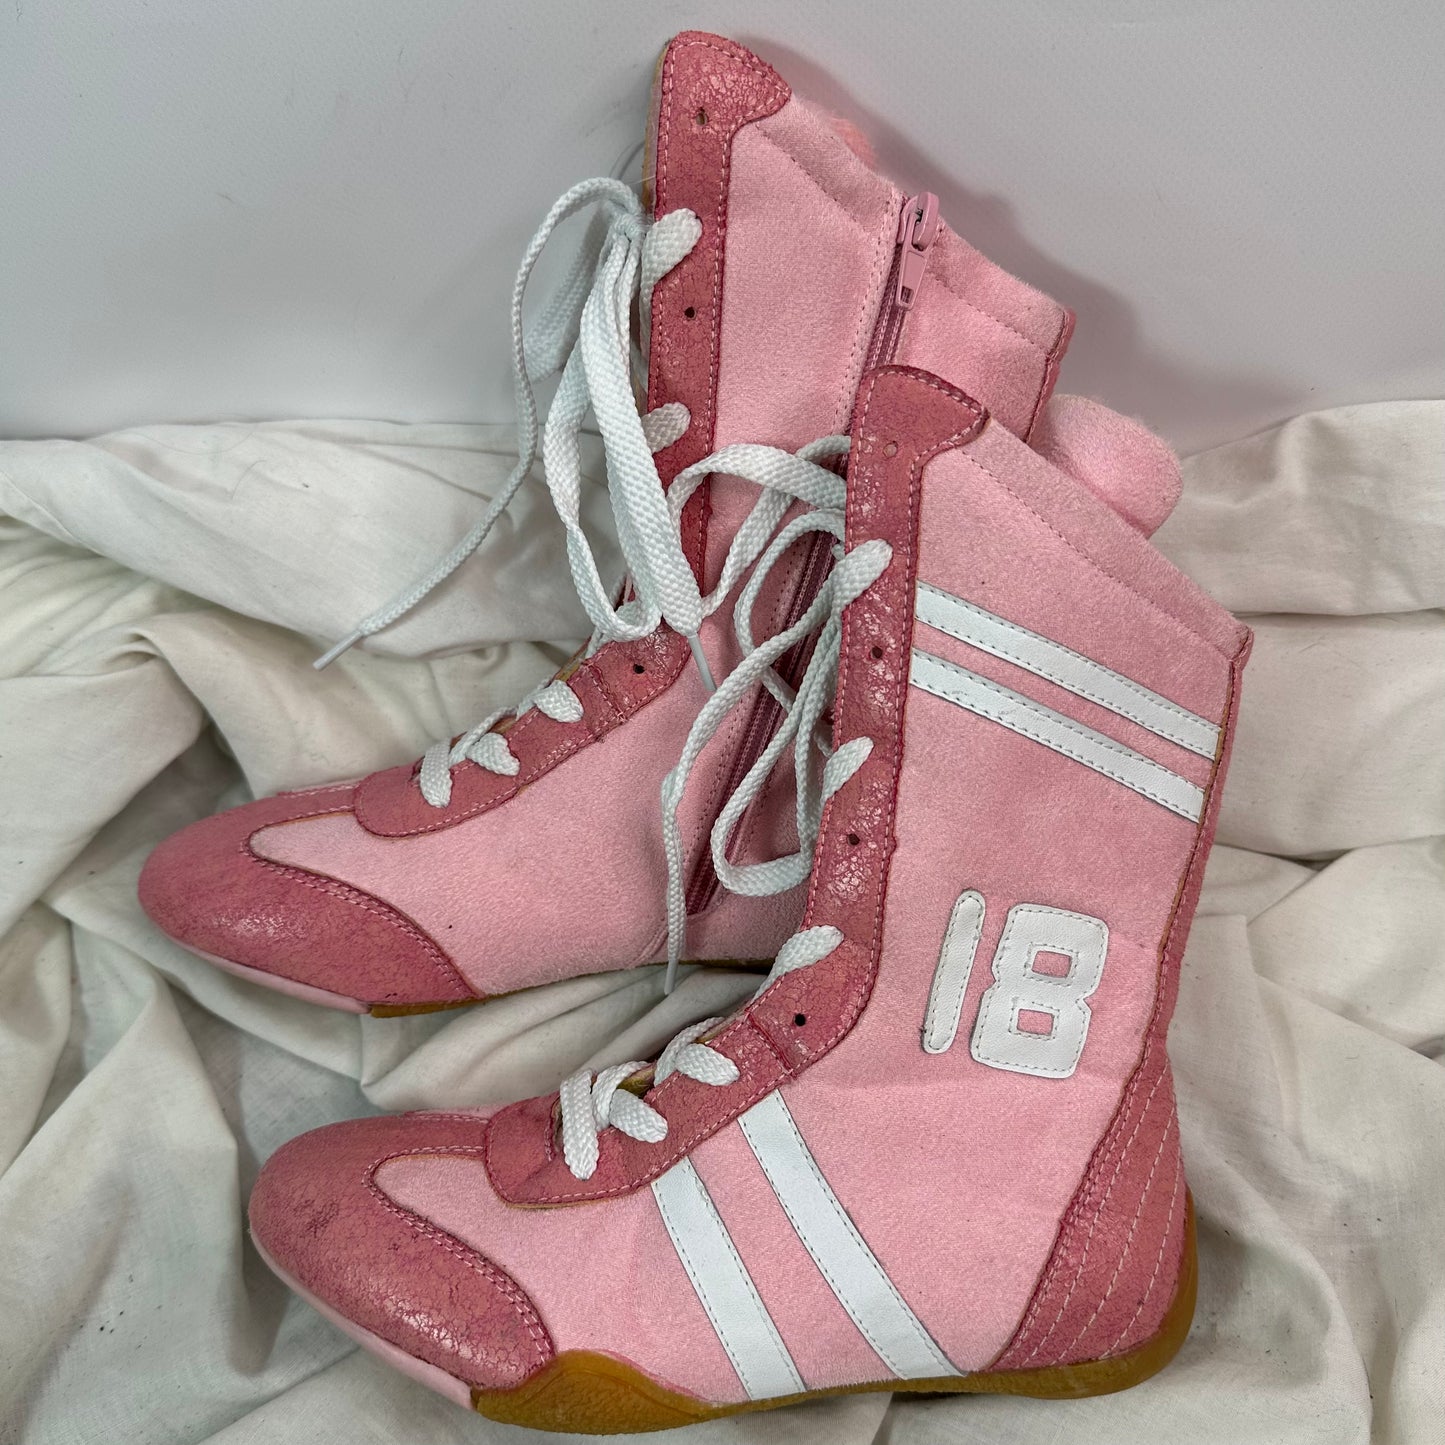 Vintage Deadstock Pink Boxing Boots